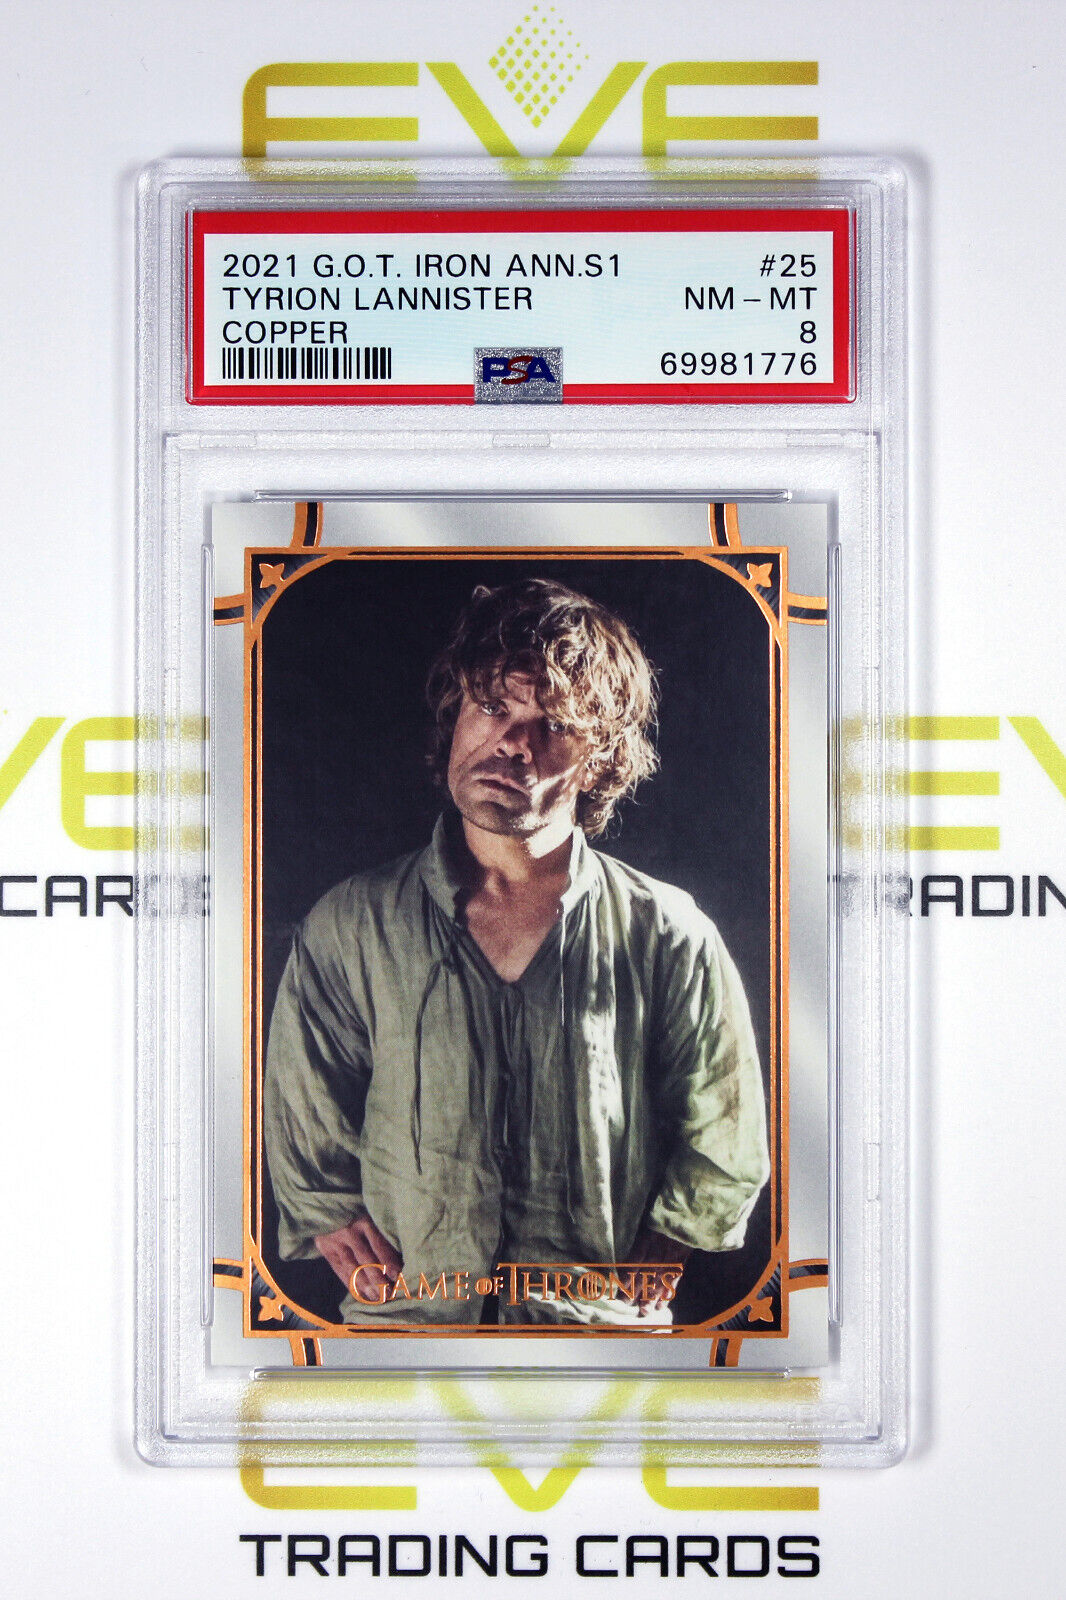 Graded Game of Thrones Card - #25 2021 Tyrion Lannister - Copper /199 - PSA 8